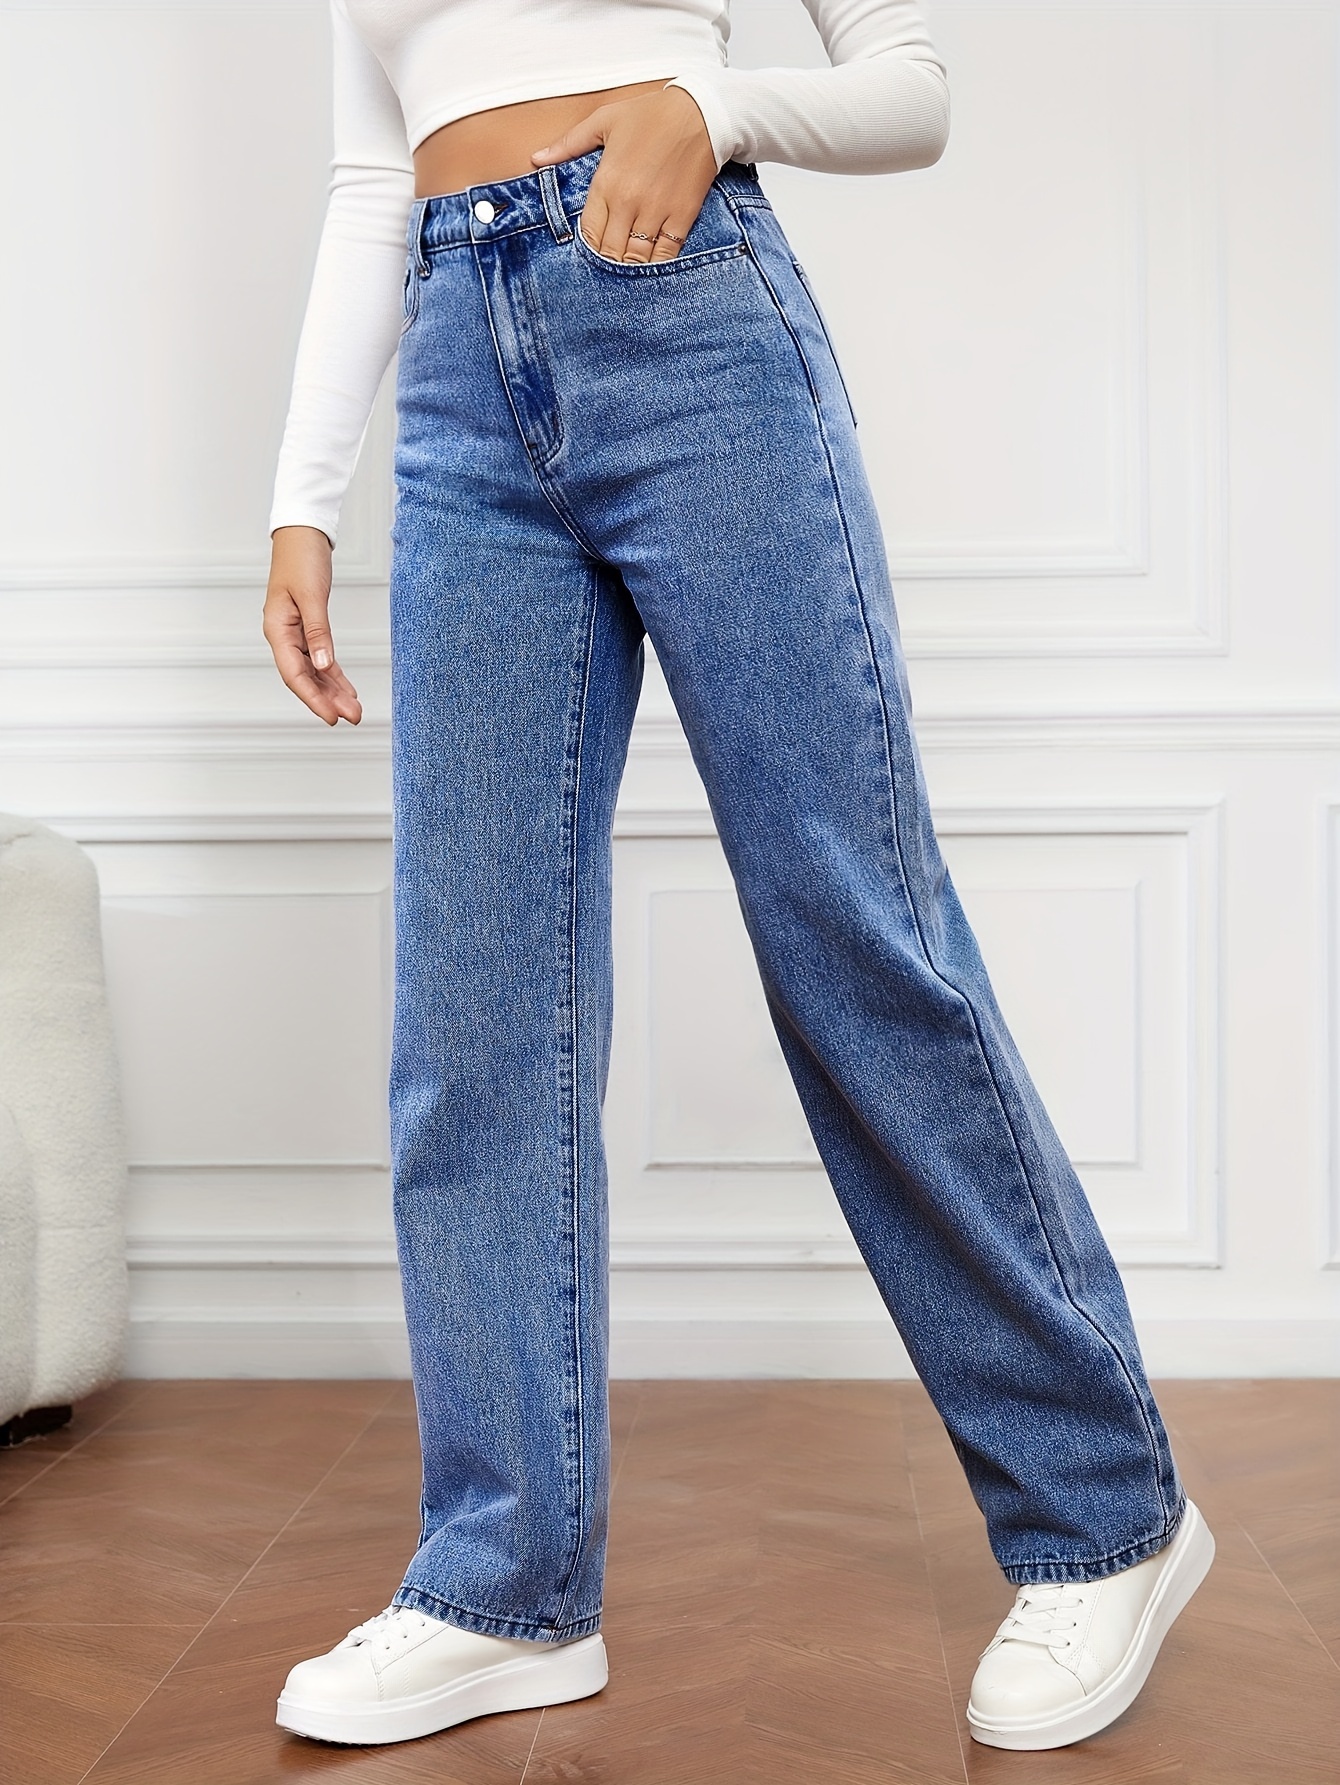 womens high waist washed jeans versatile straight leg pants casual style denim long trousers for daily wear details 1